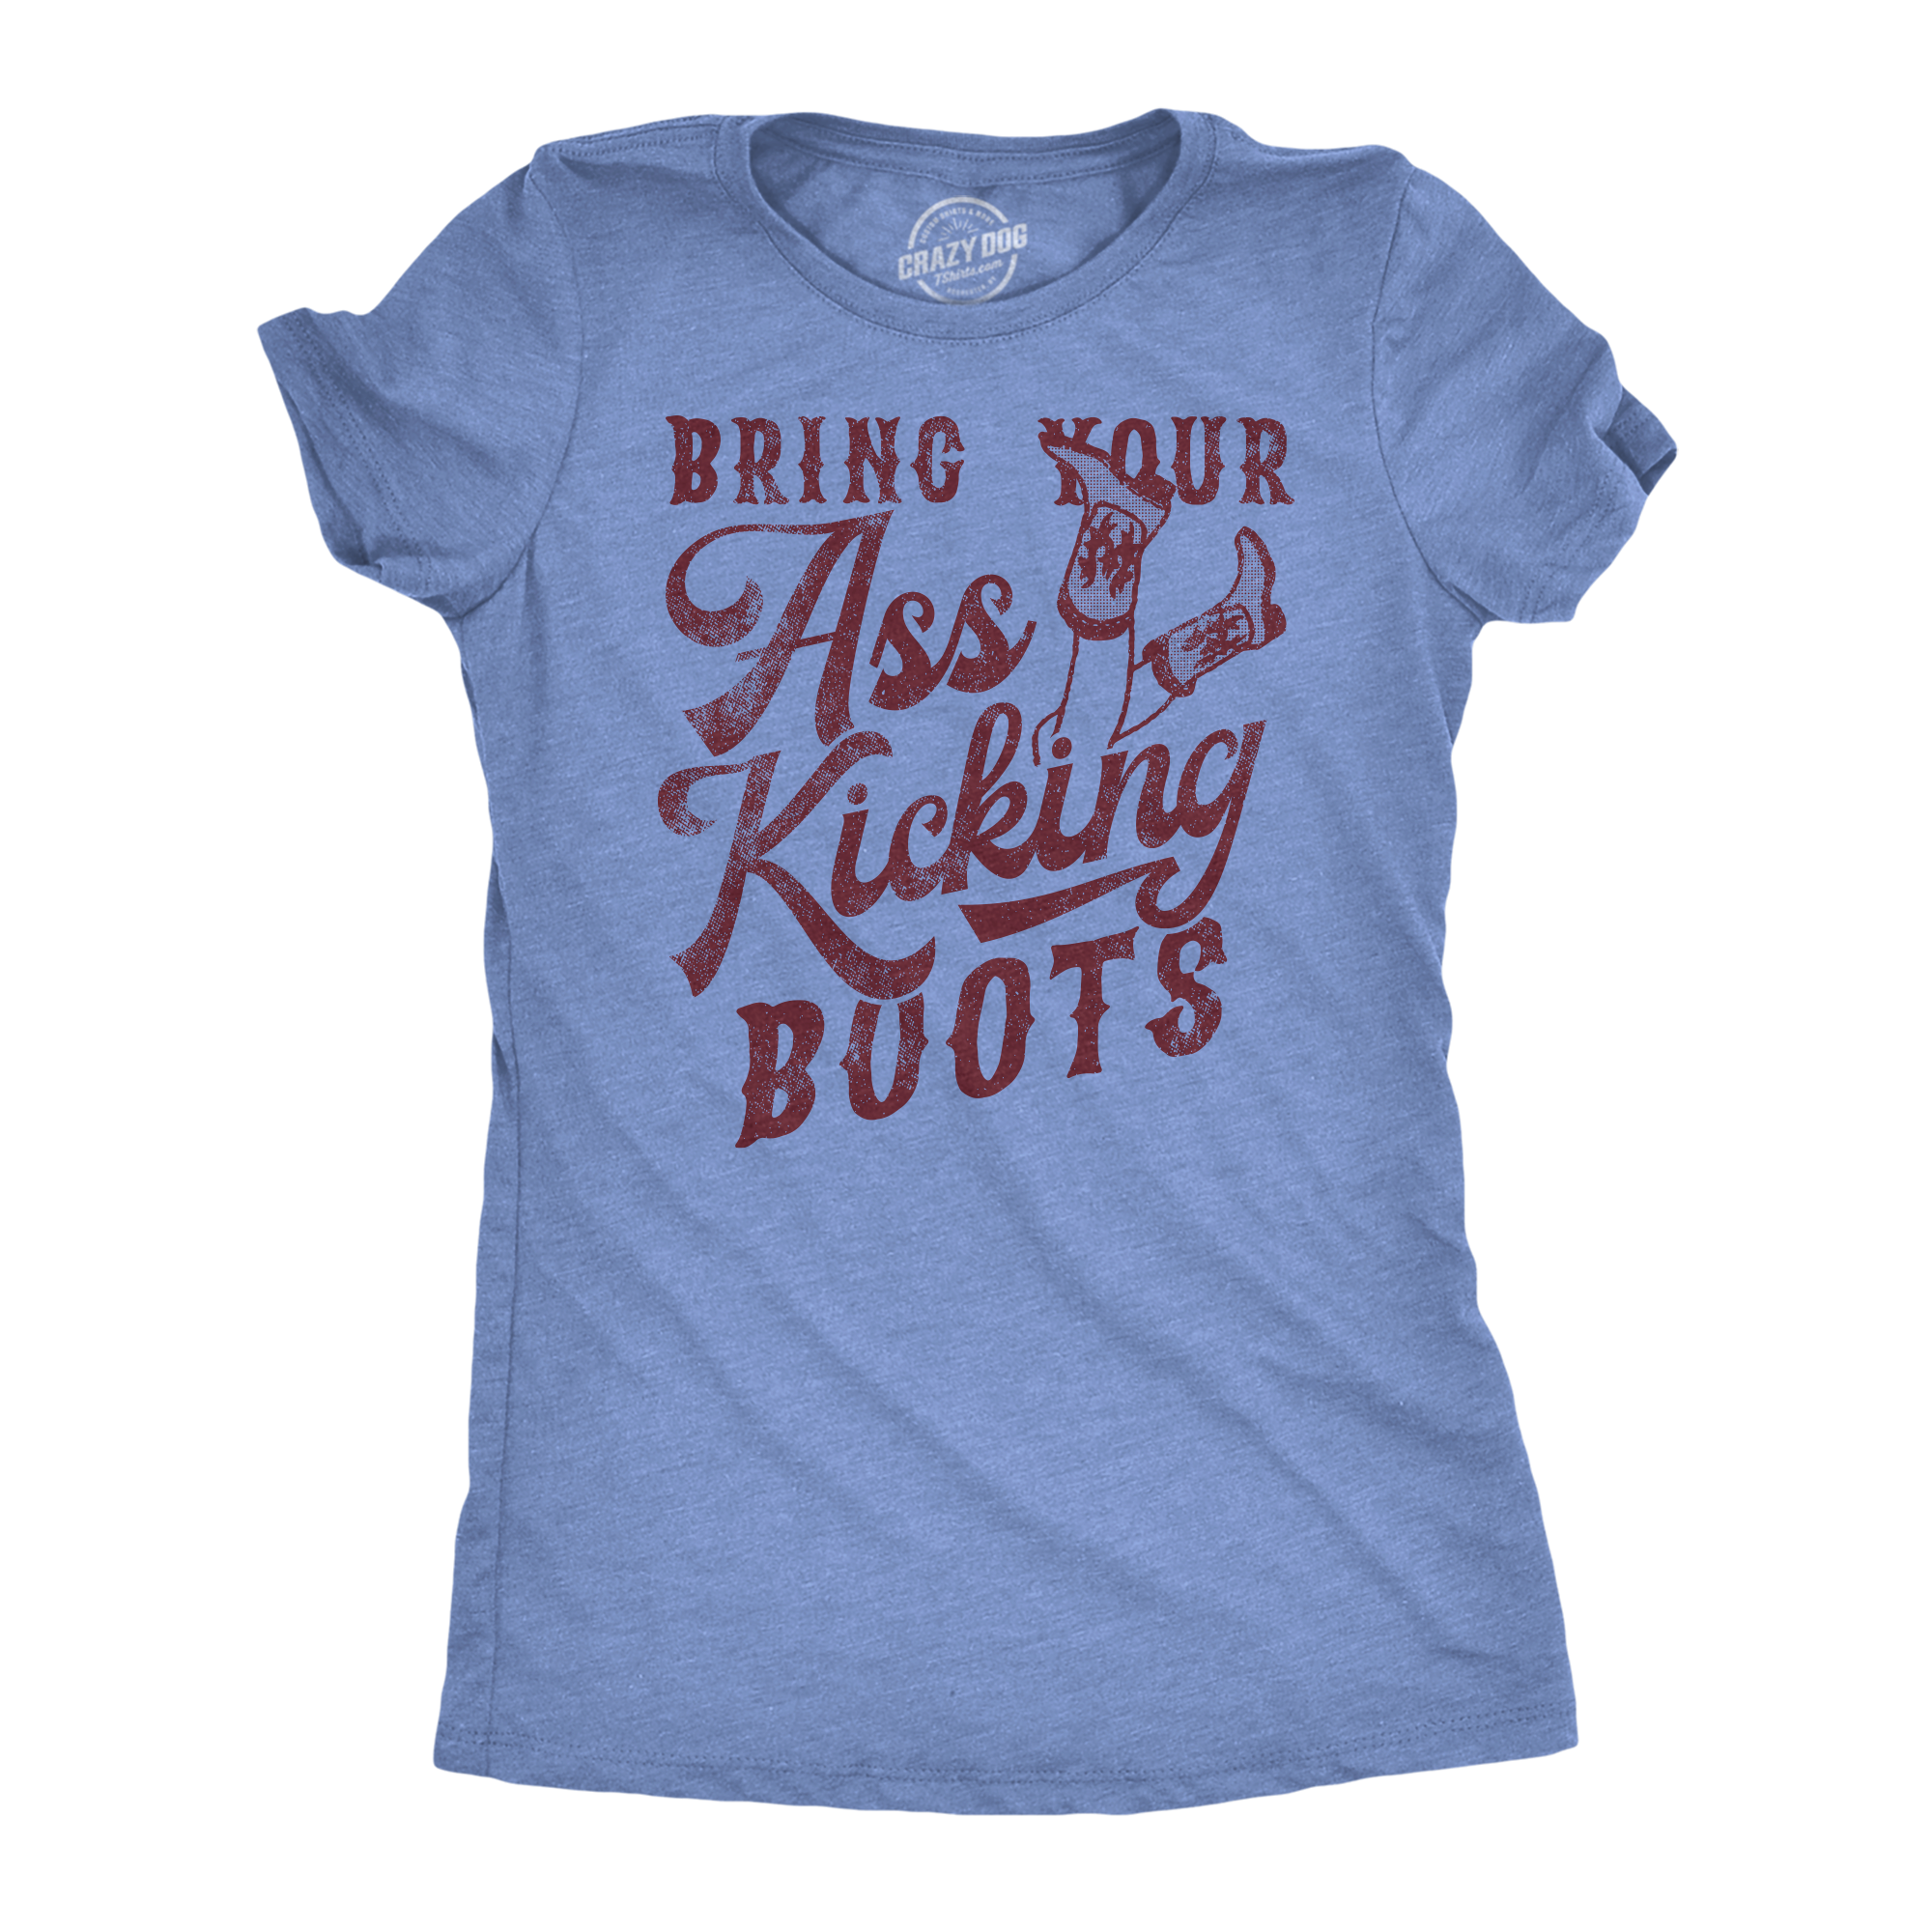 Funny Light Heather Blue - Bring Your Ass Kicking Boots Bring Your Ass Kicking Boots Womens T Shirt Nerdy sarcastic Tee